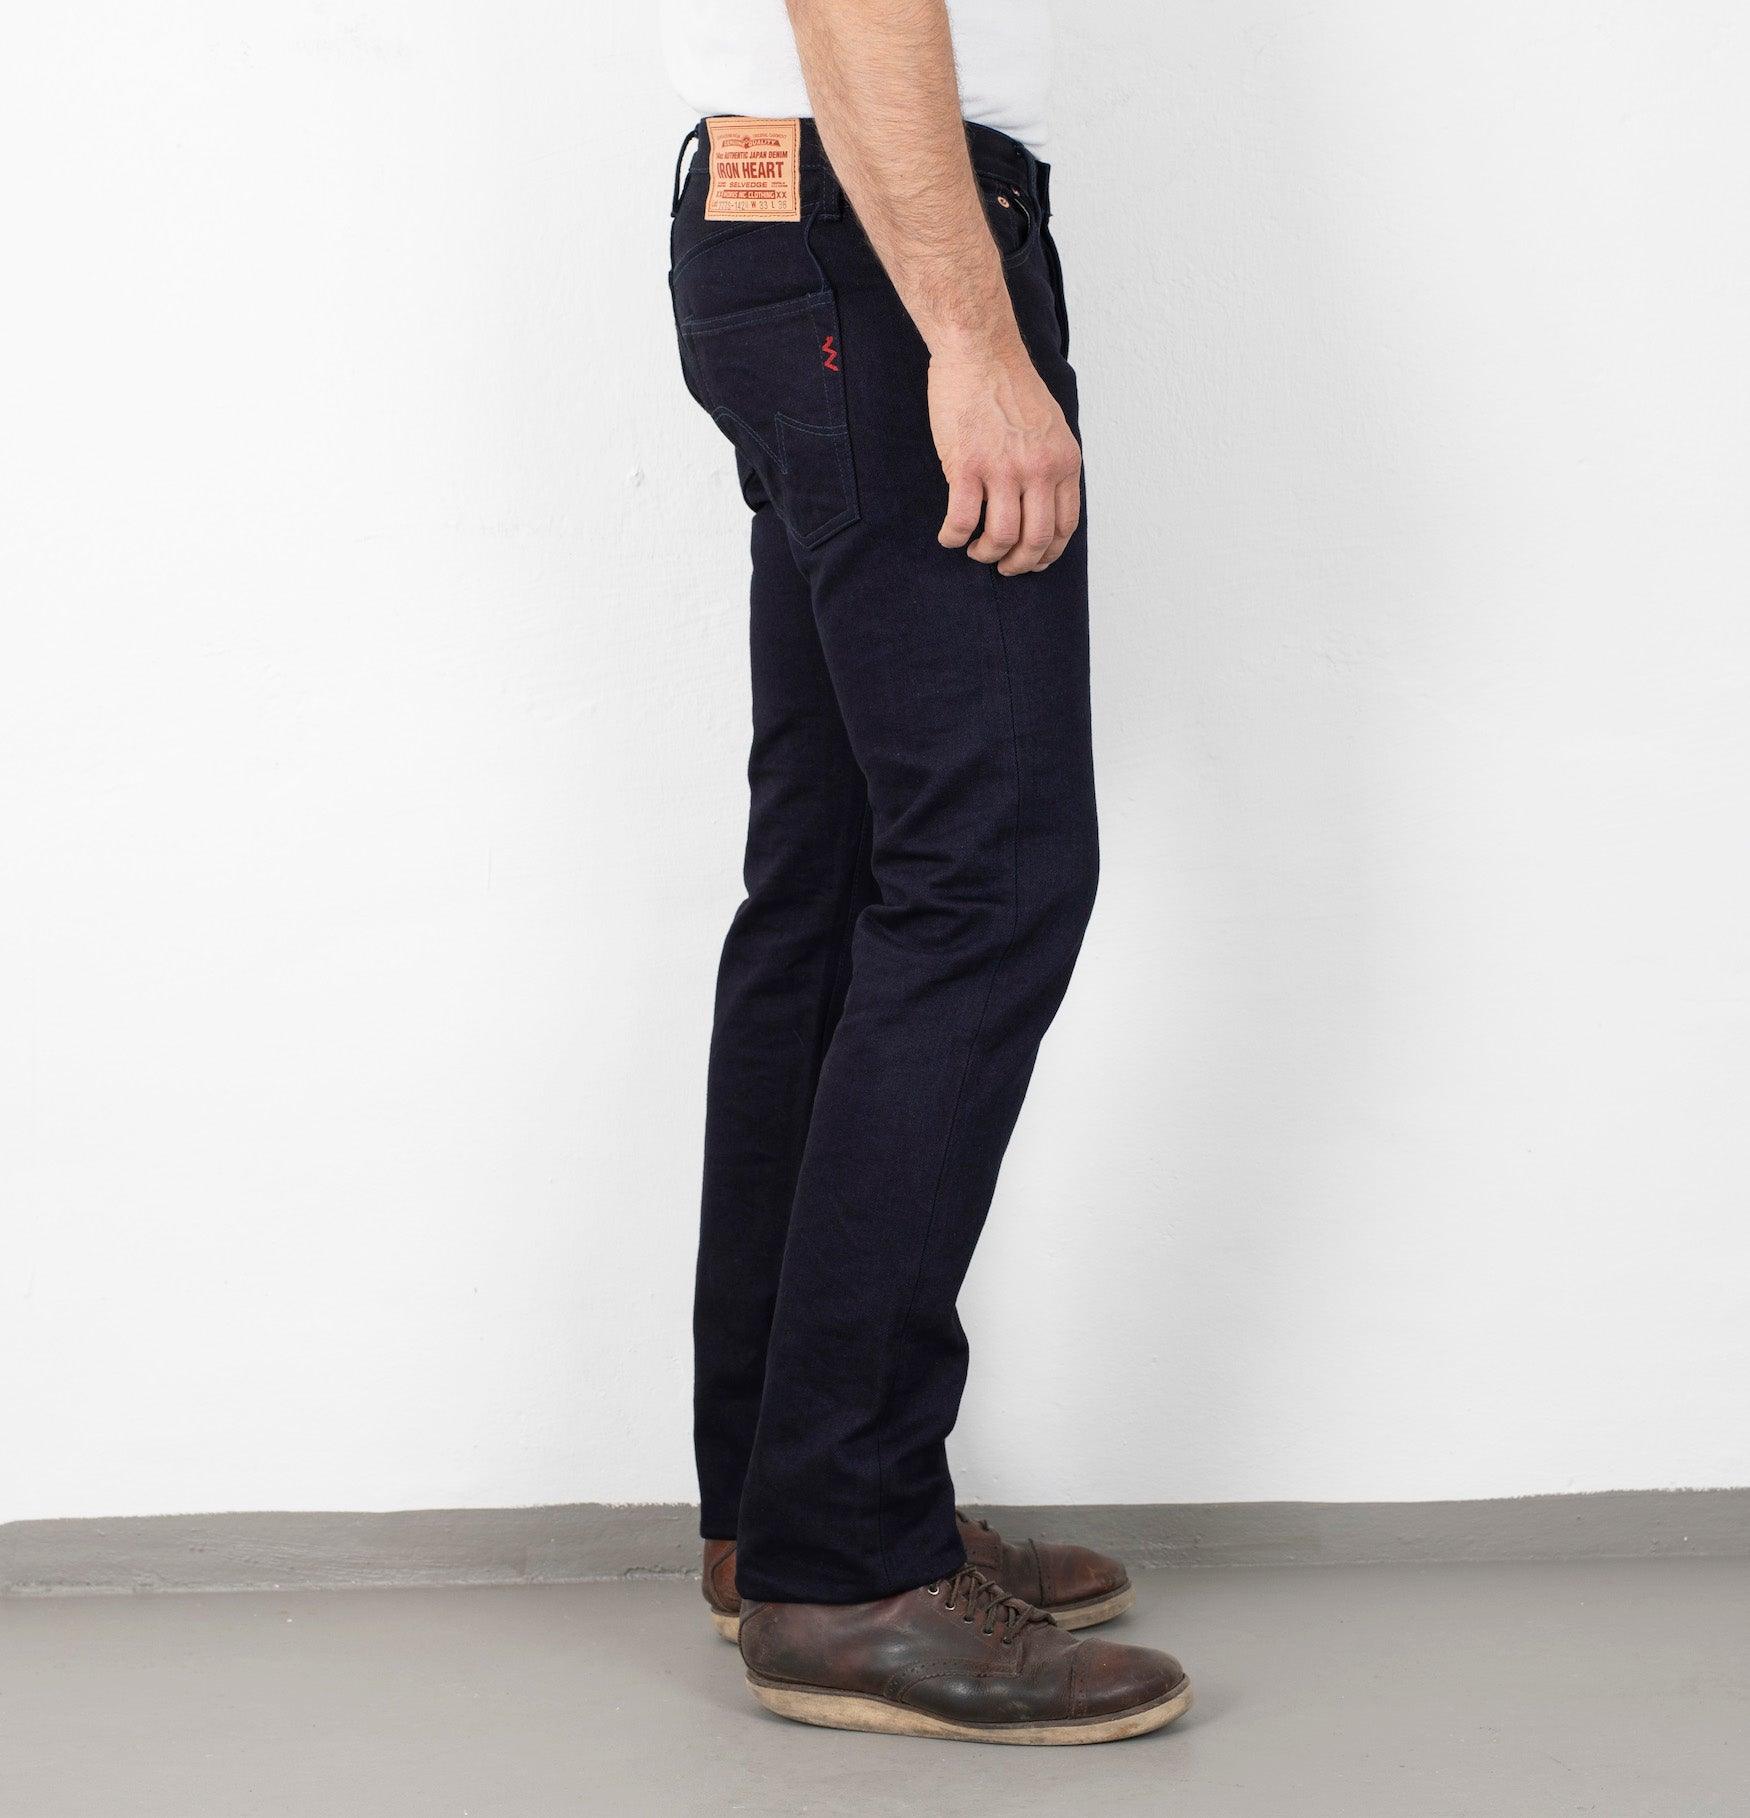 Image showing the IH-777S-14ii - 14oz Selvedge Denim Slim Tapered Cut Jeans - Indigo/Indigo which is a Jeans described by the following info 777, Bottoms, Iron Heart, Jeans, Released and sold on the IRON HEART GERMANY online store